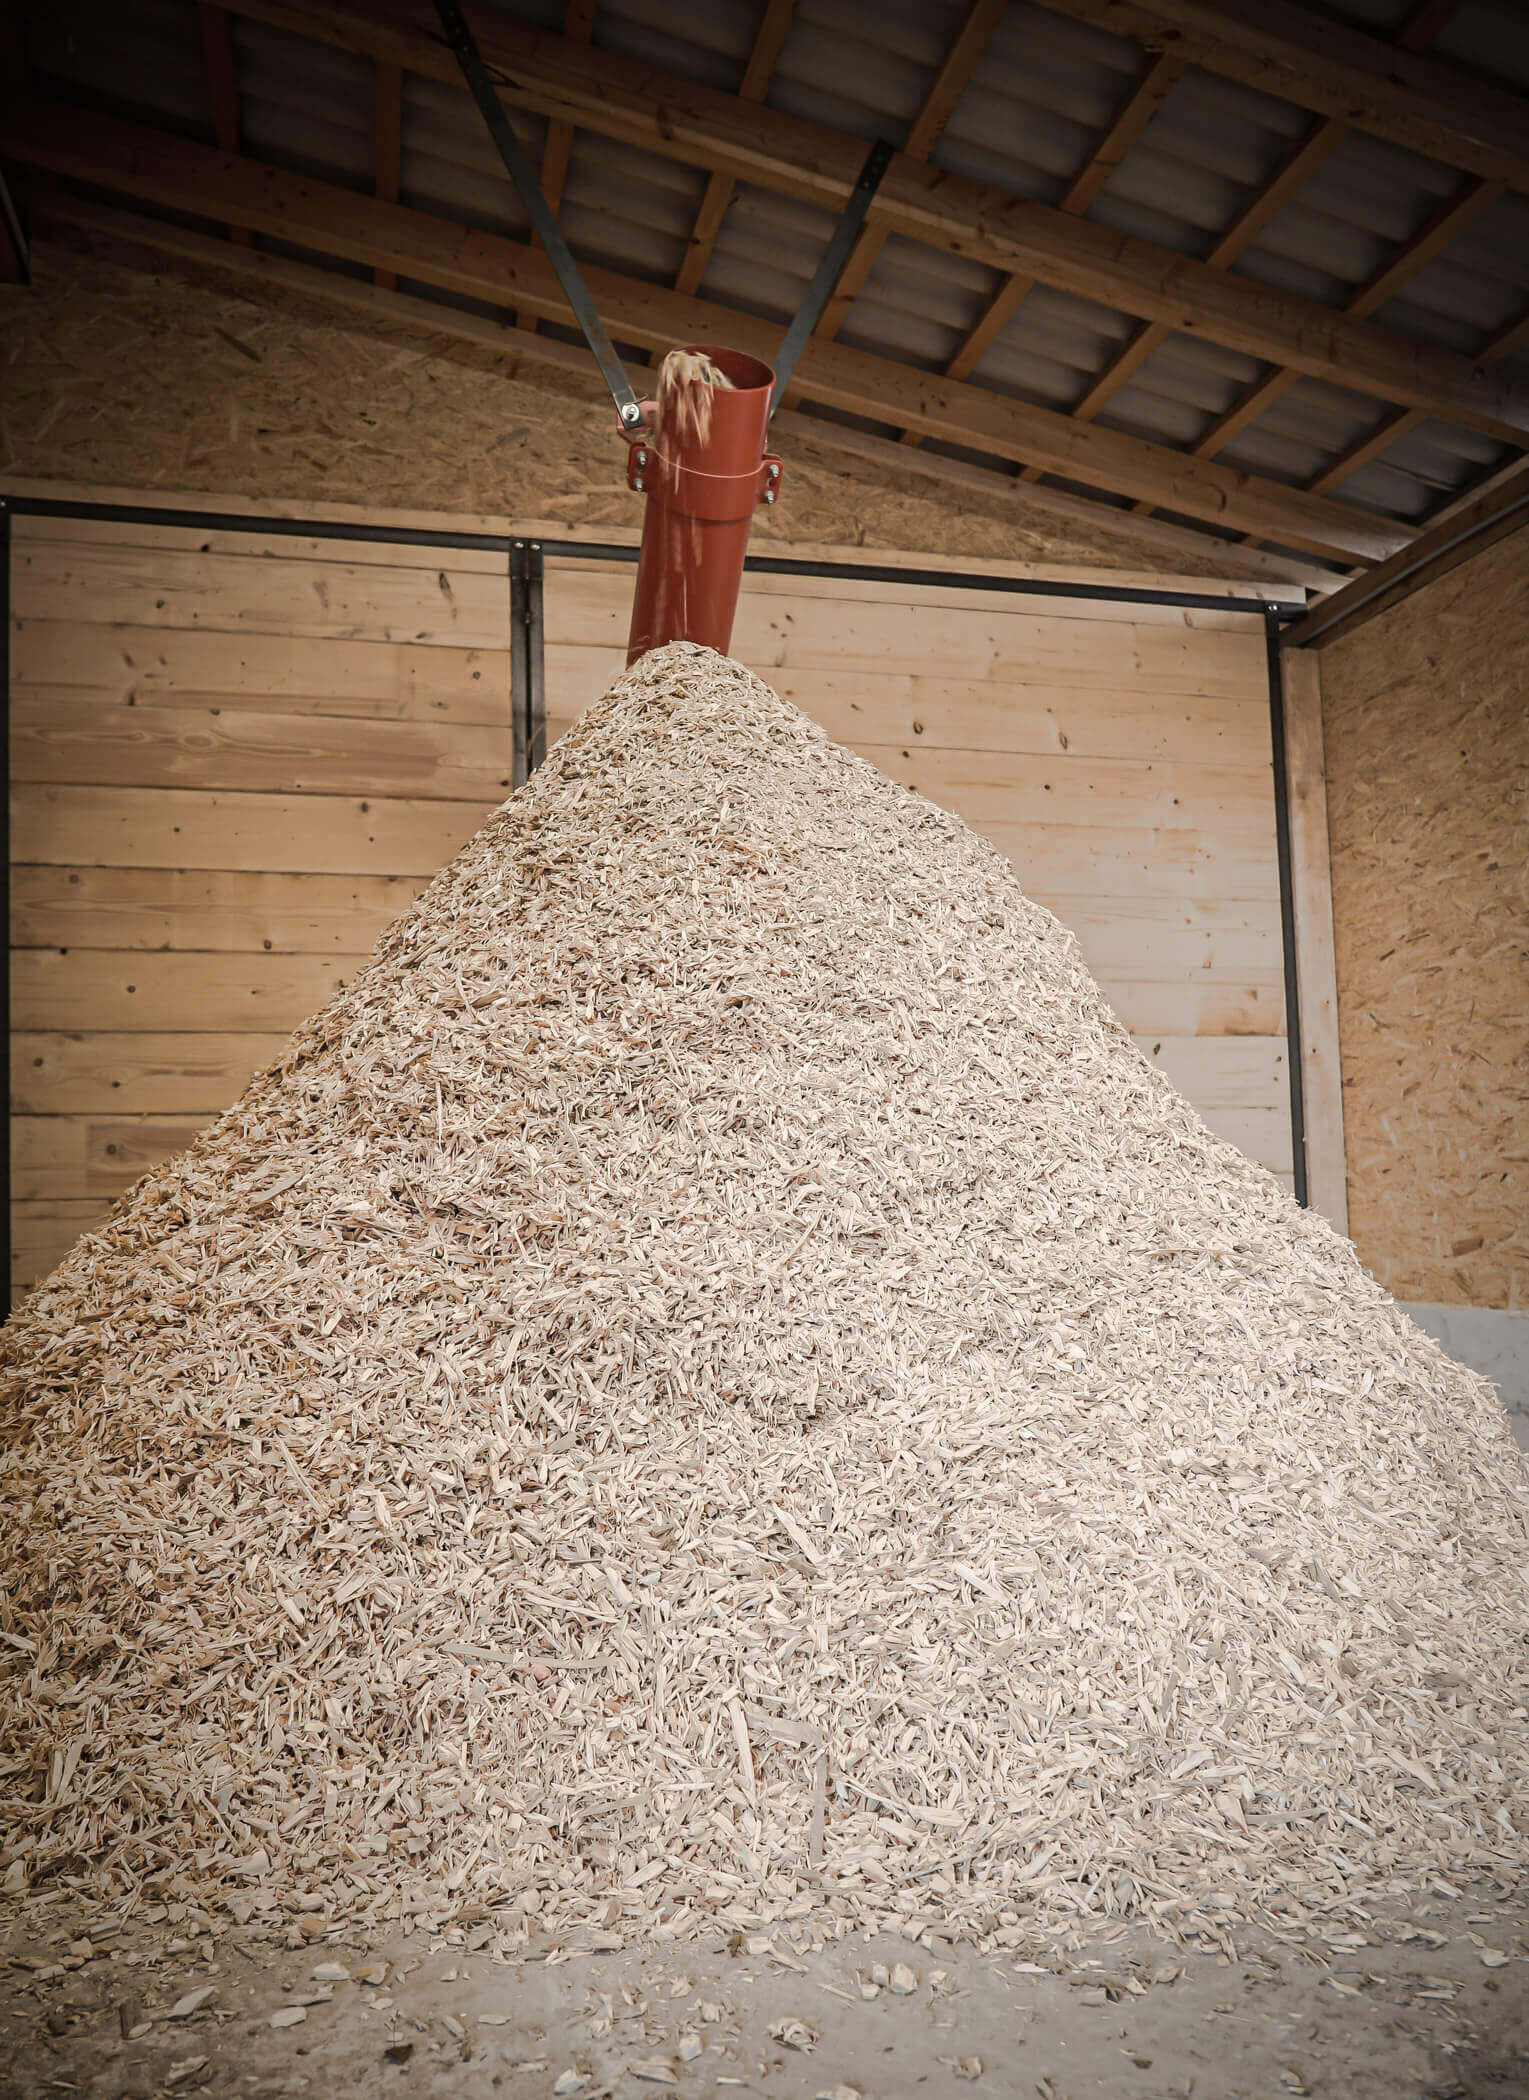 wood chips are used for heating the premises